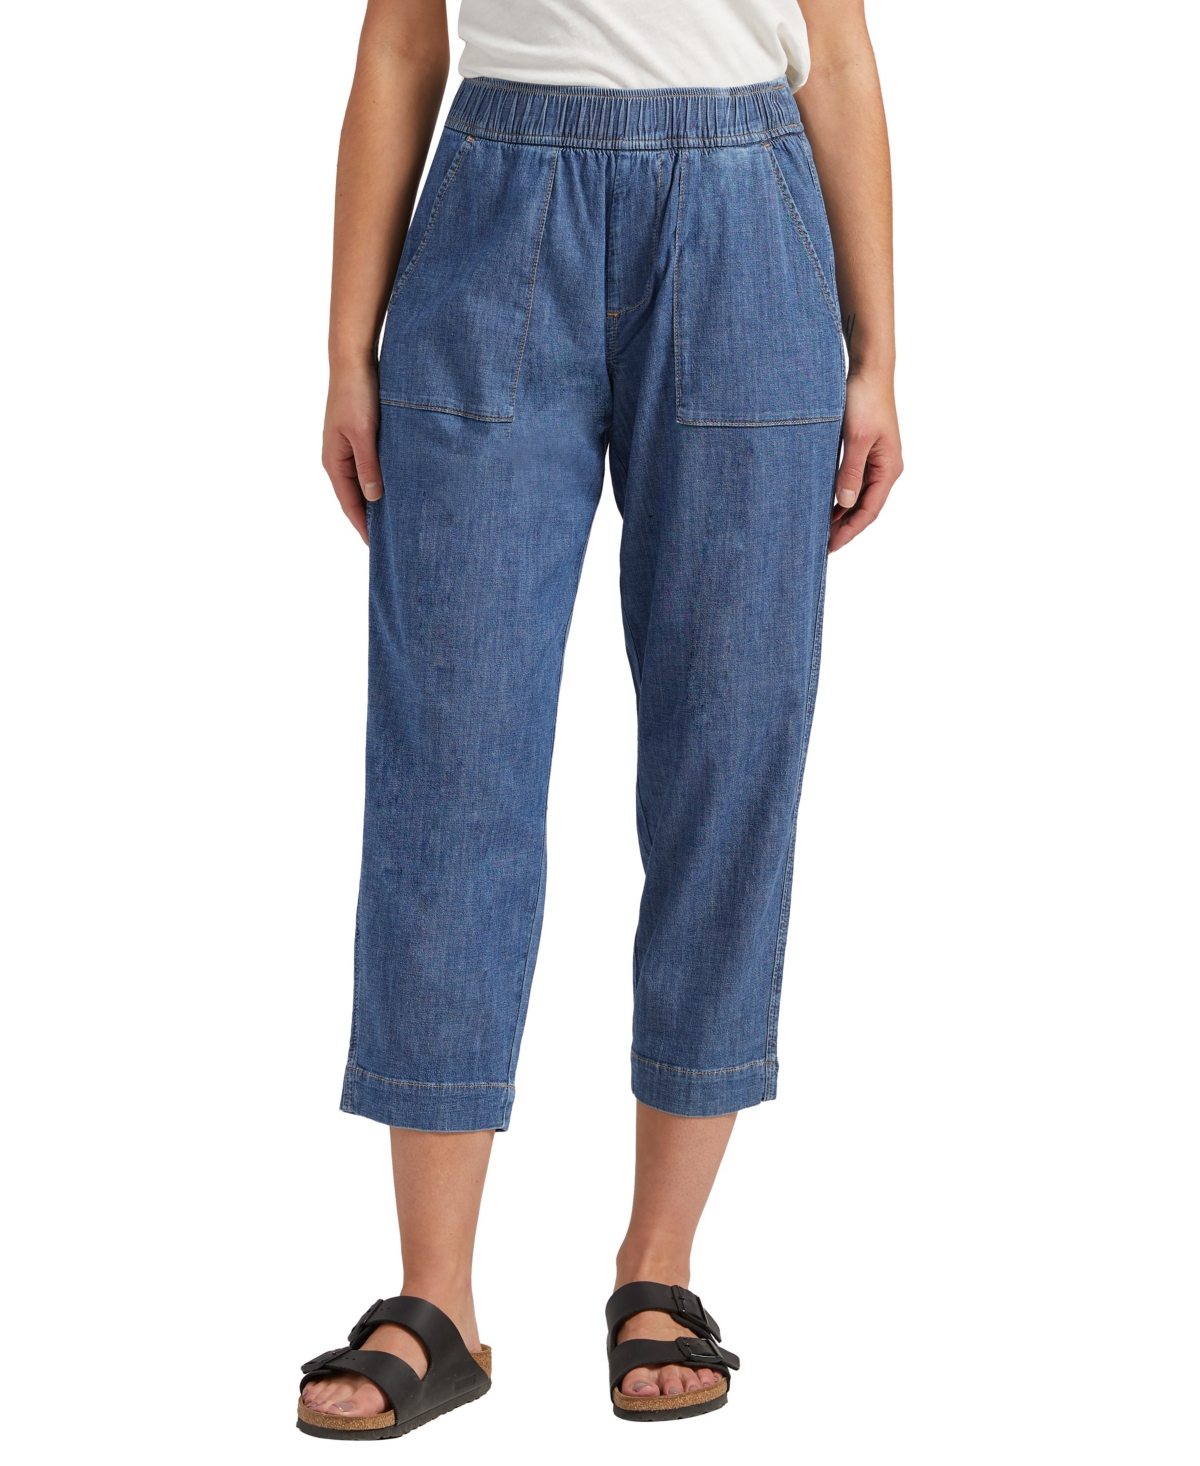 Women's High Rise Tapered Pull-On Pants - Amalfi Blue